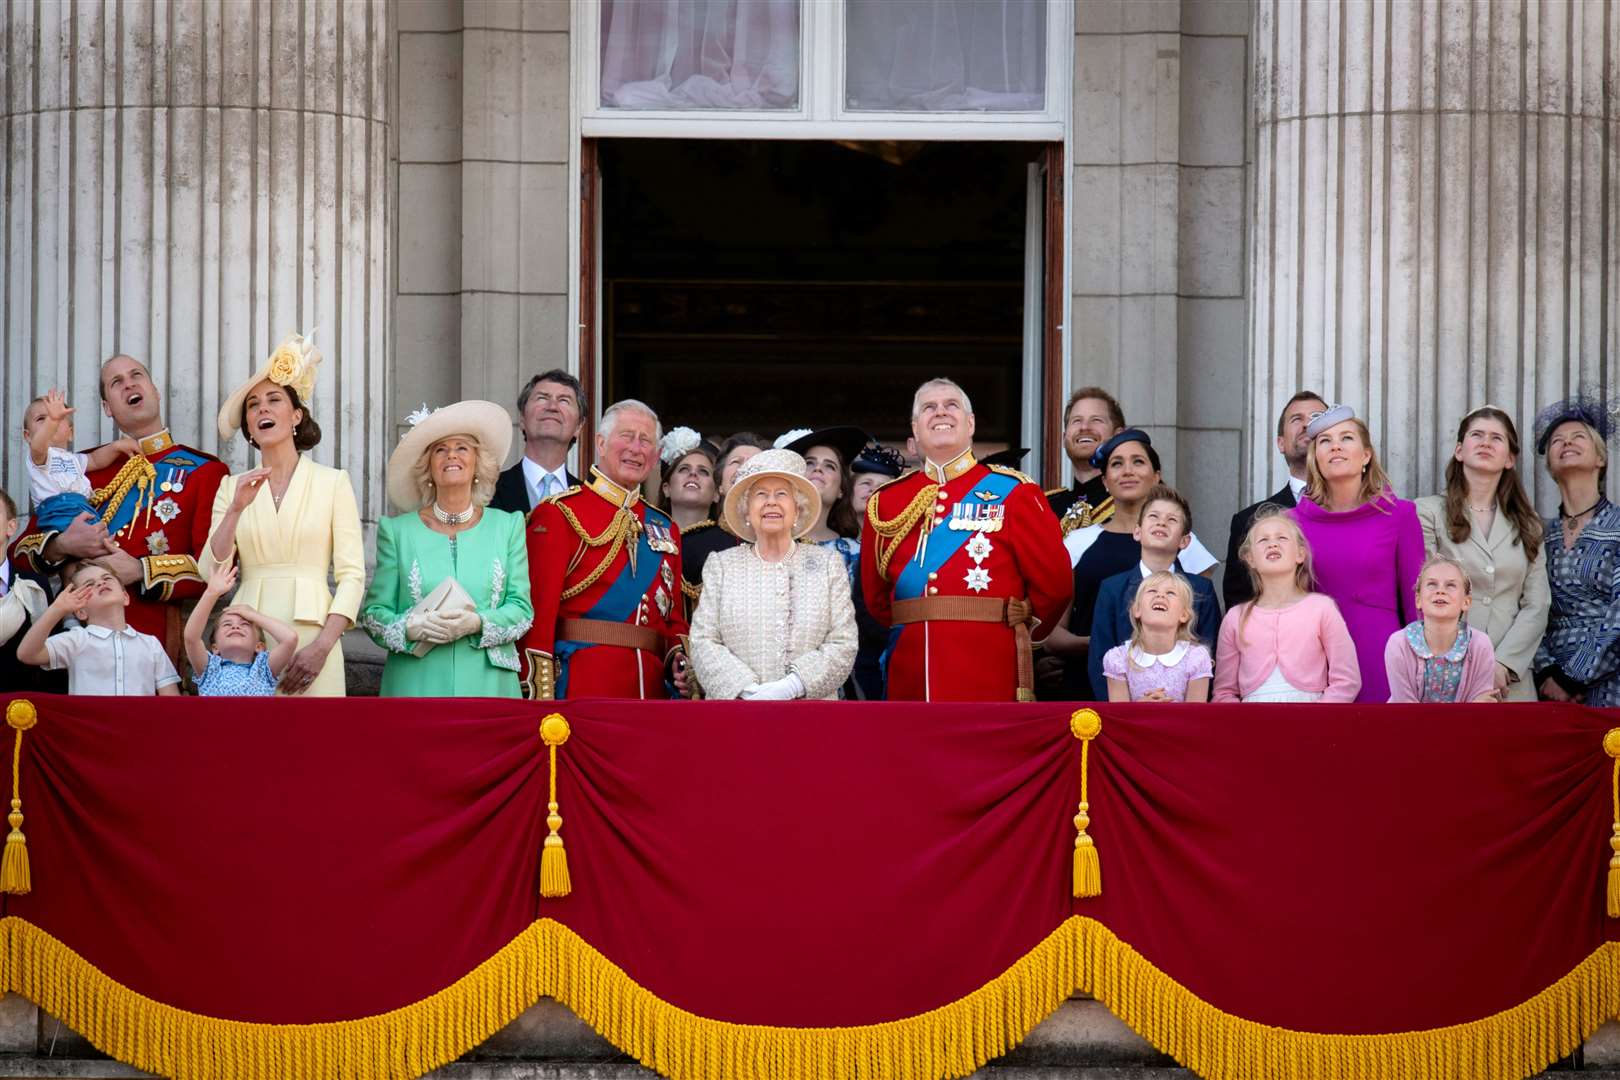 The Queen joined by members of the royal family on the Buckingham Palace balcony in 2019 (PA)